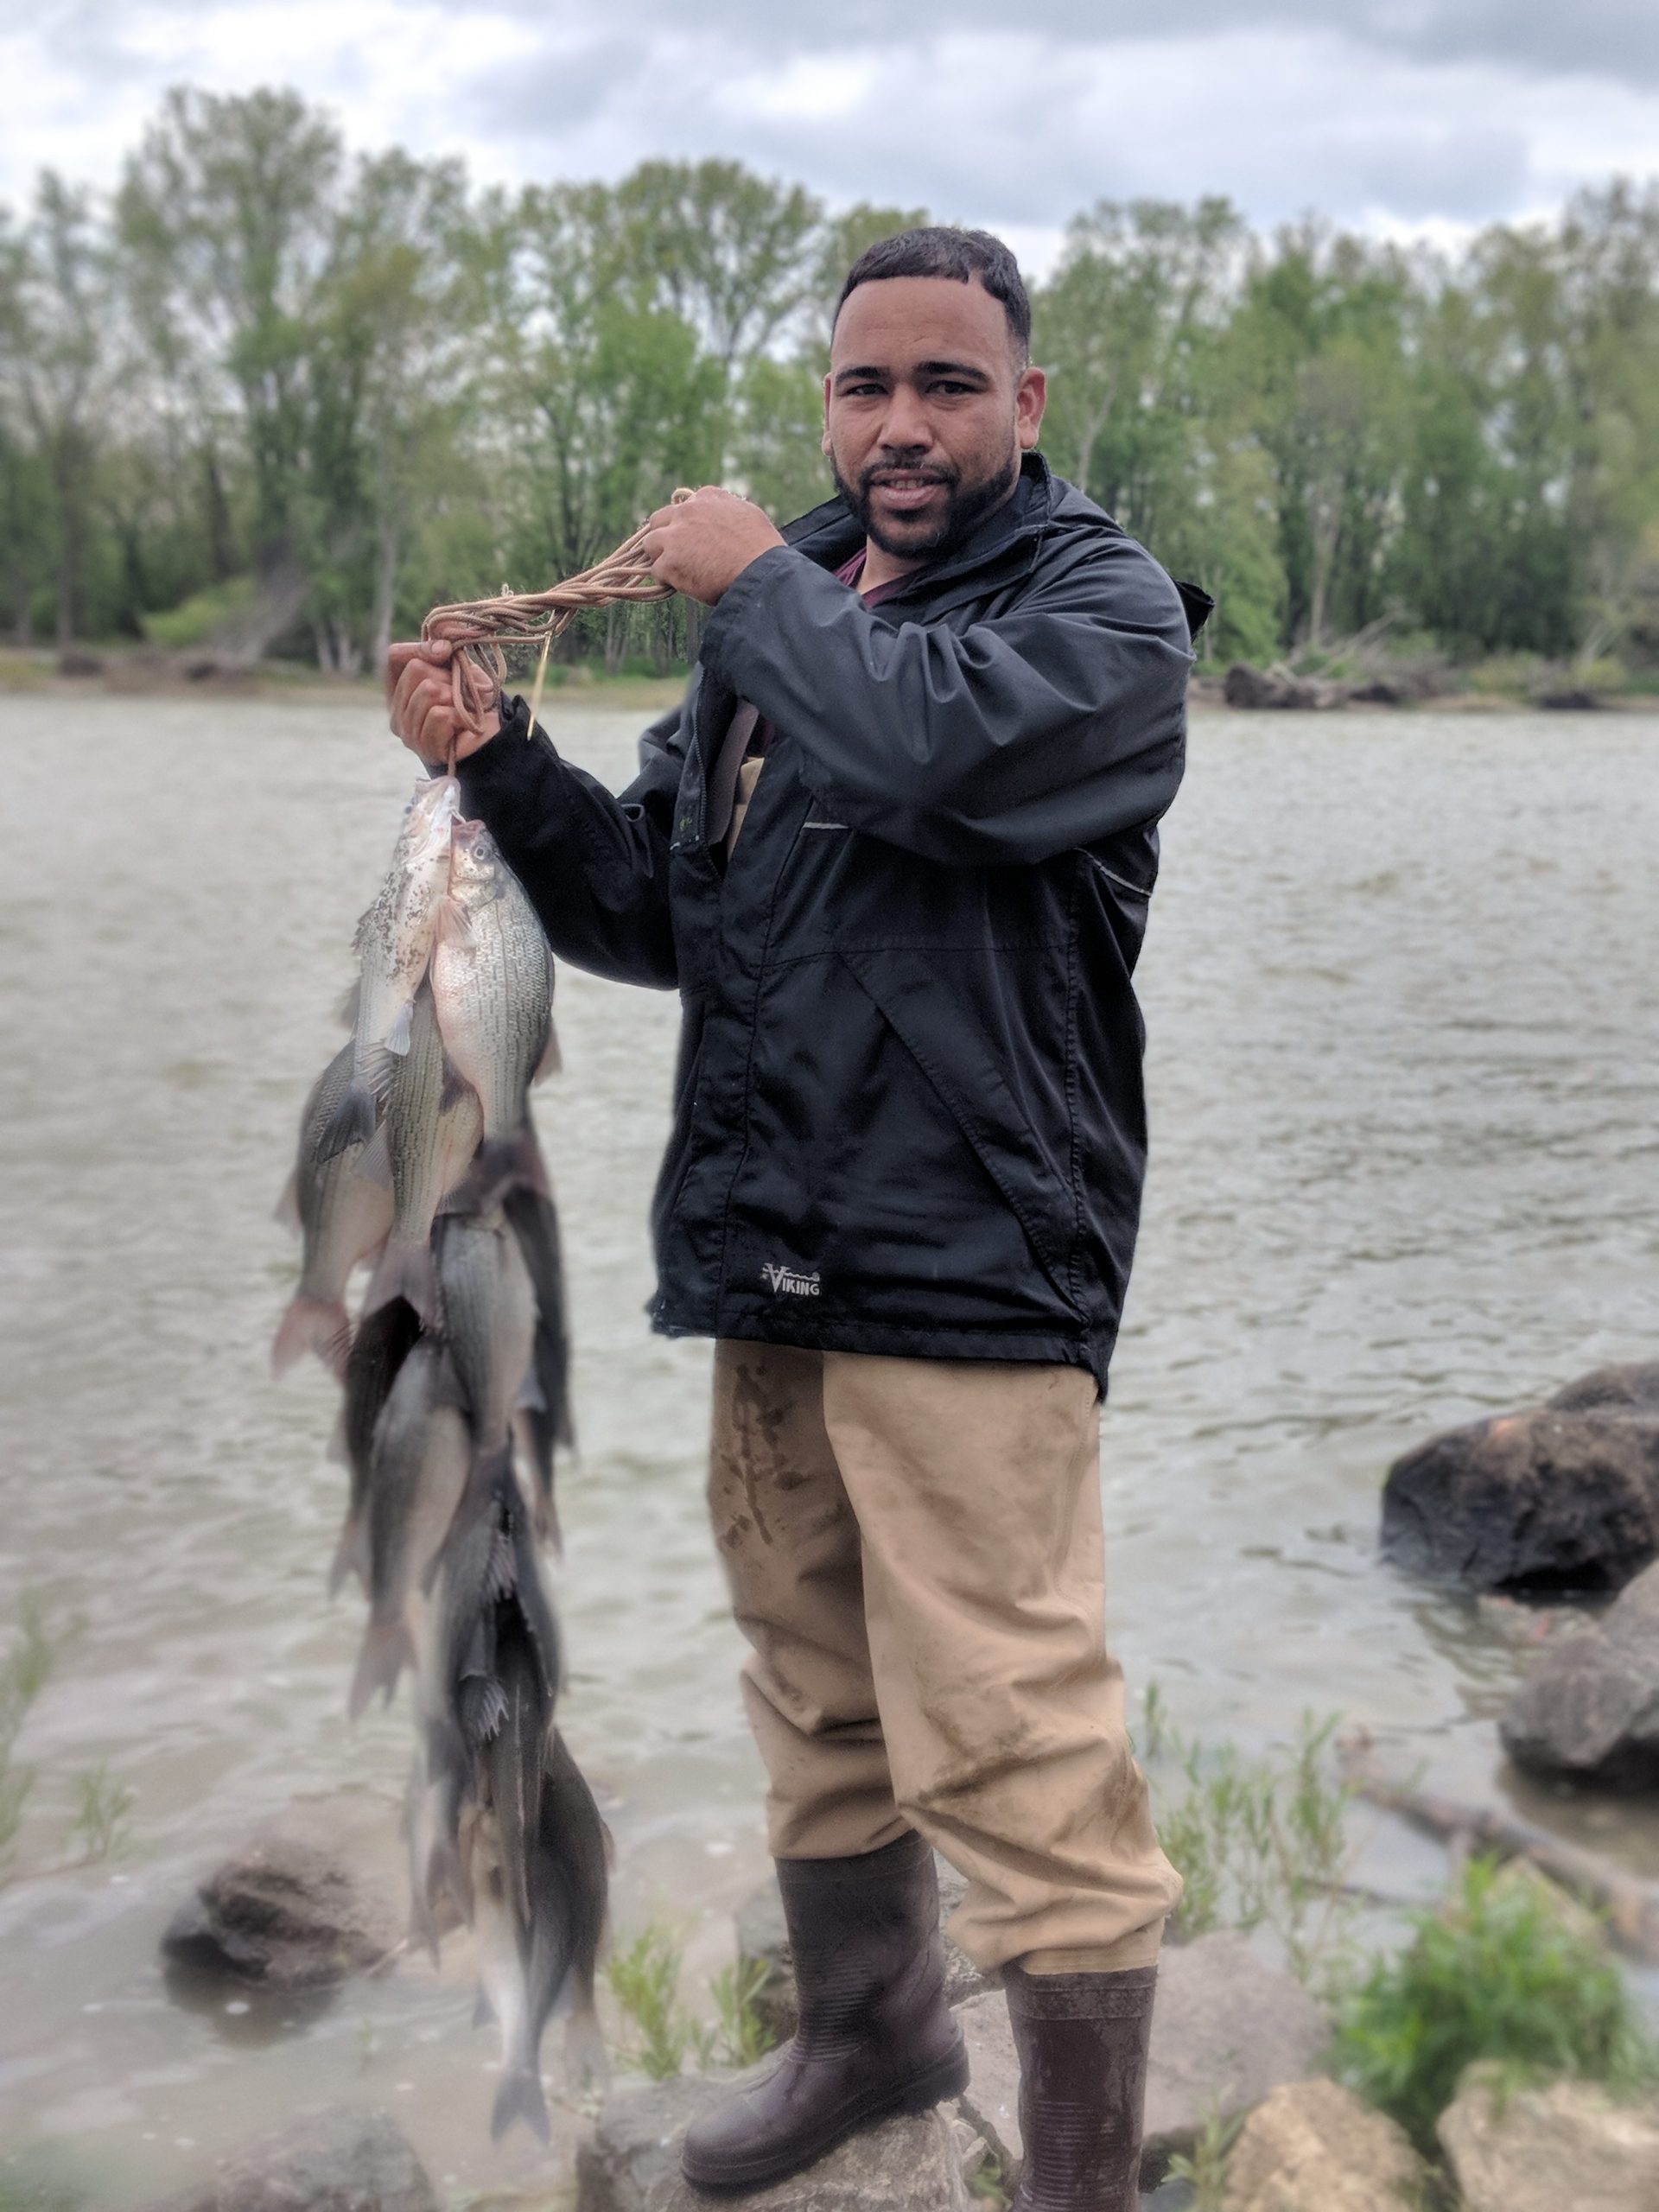 maumee river report- May 19, 2020